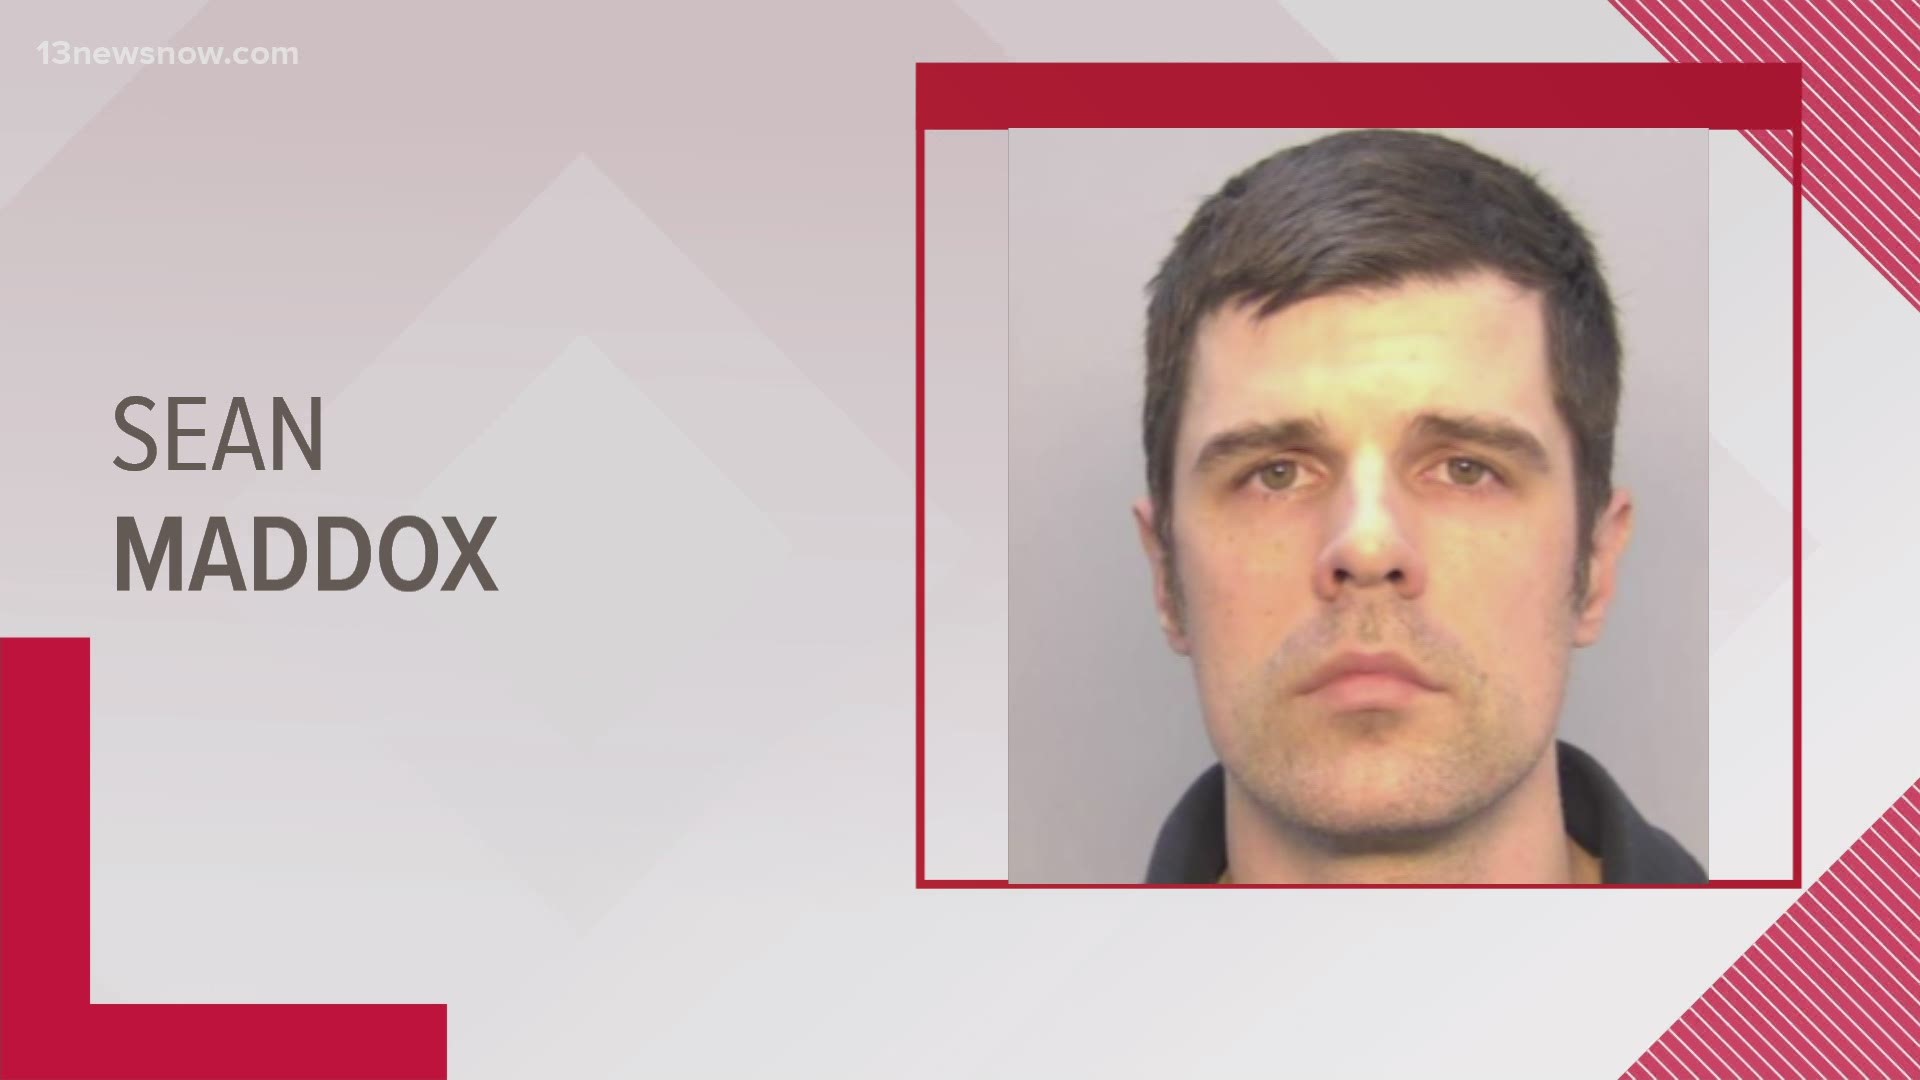 Sean Maddox is charged with abduction with the intent to defile, rape, 2 counts of forcible sodomy, 2 counts of threatening bodily harm, and 2 counts of stalking.